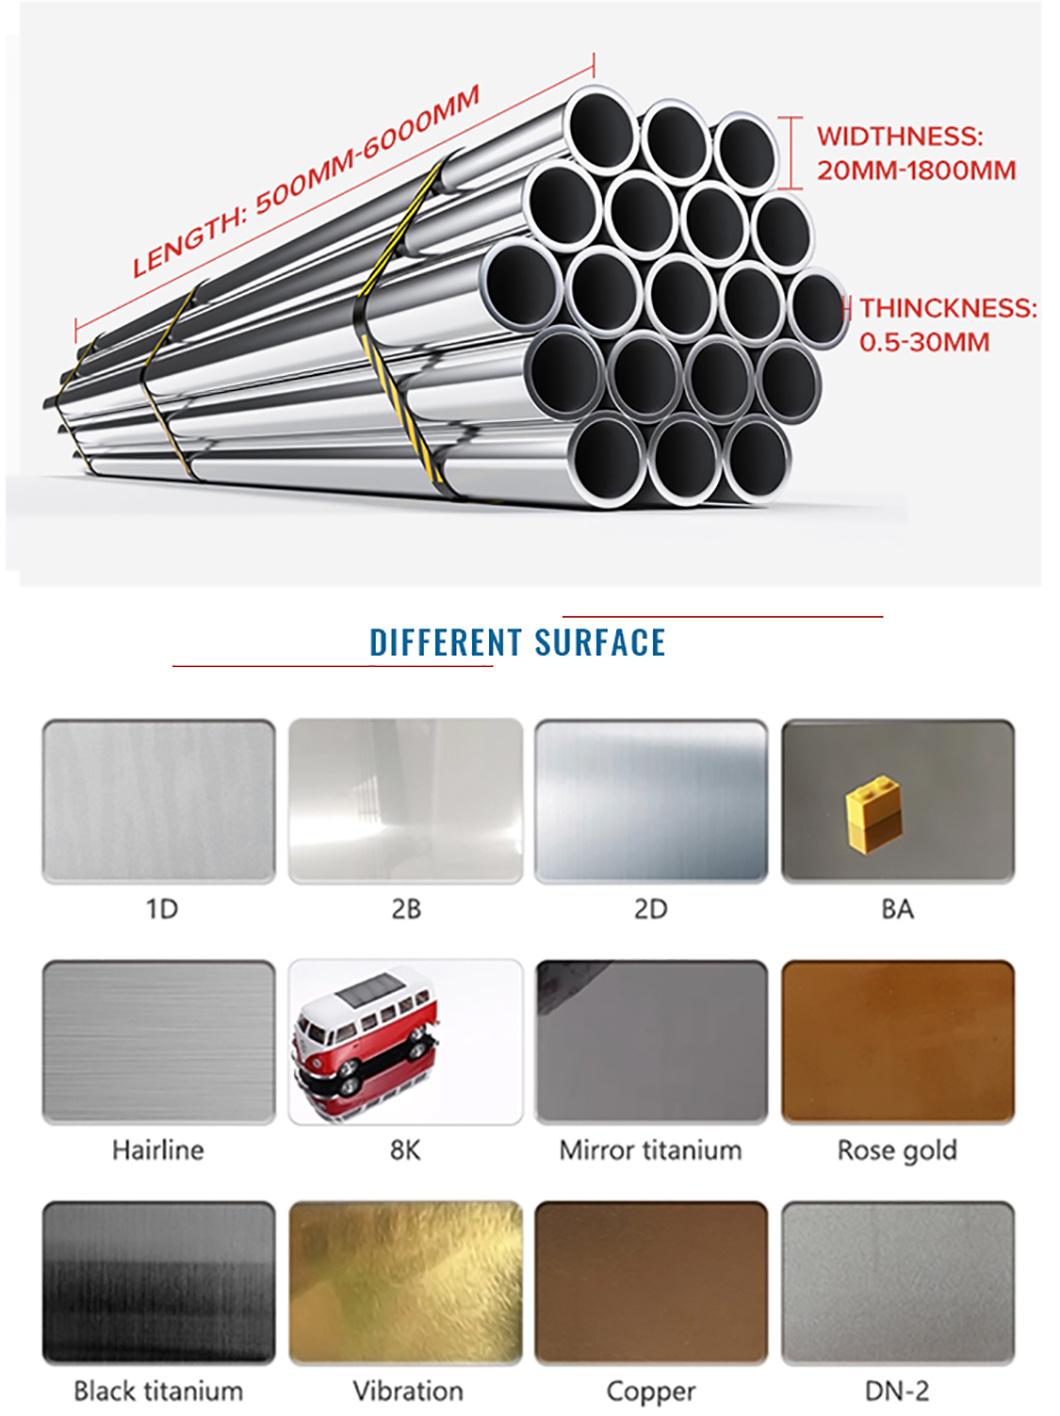 on-Time Delivery High Technology Stainless Seamless Pipe 304